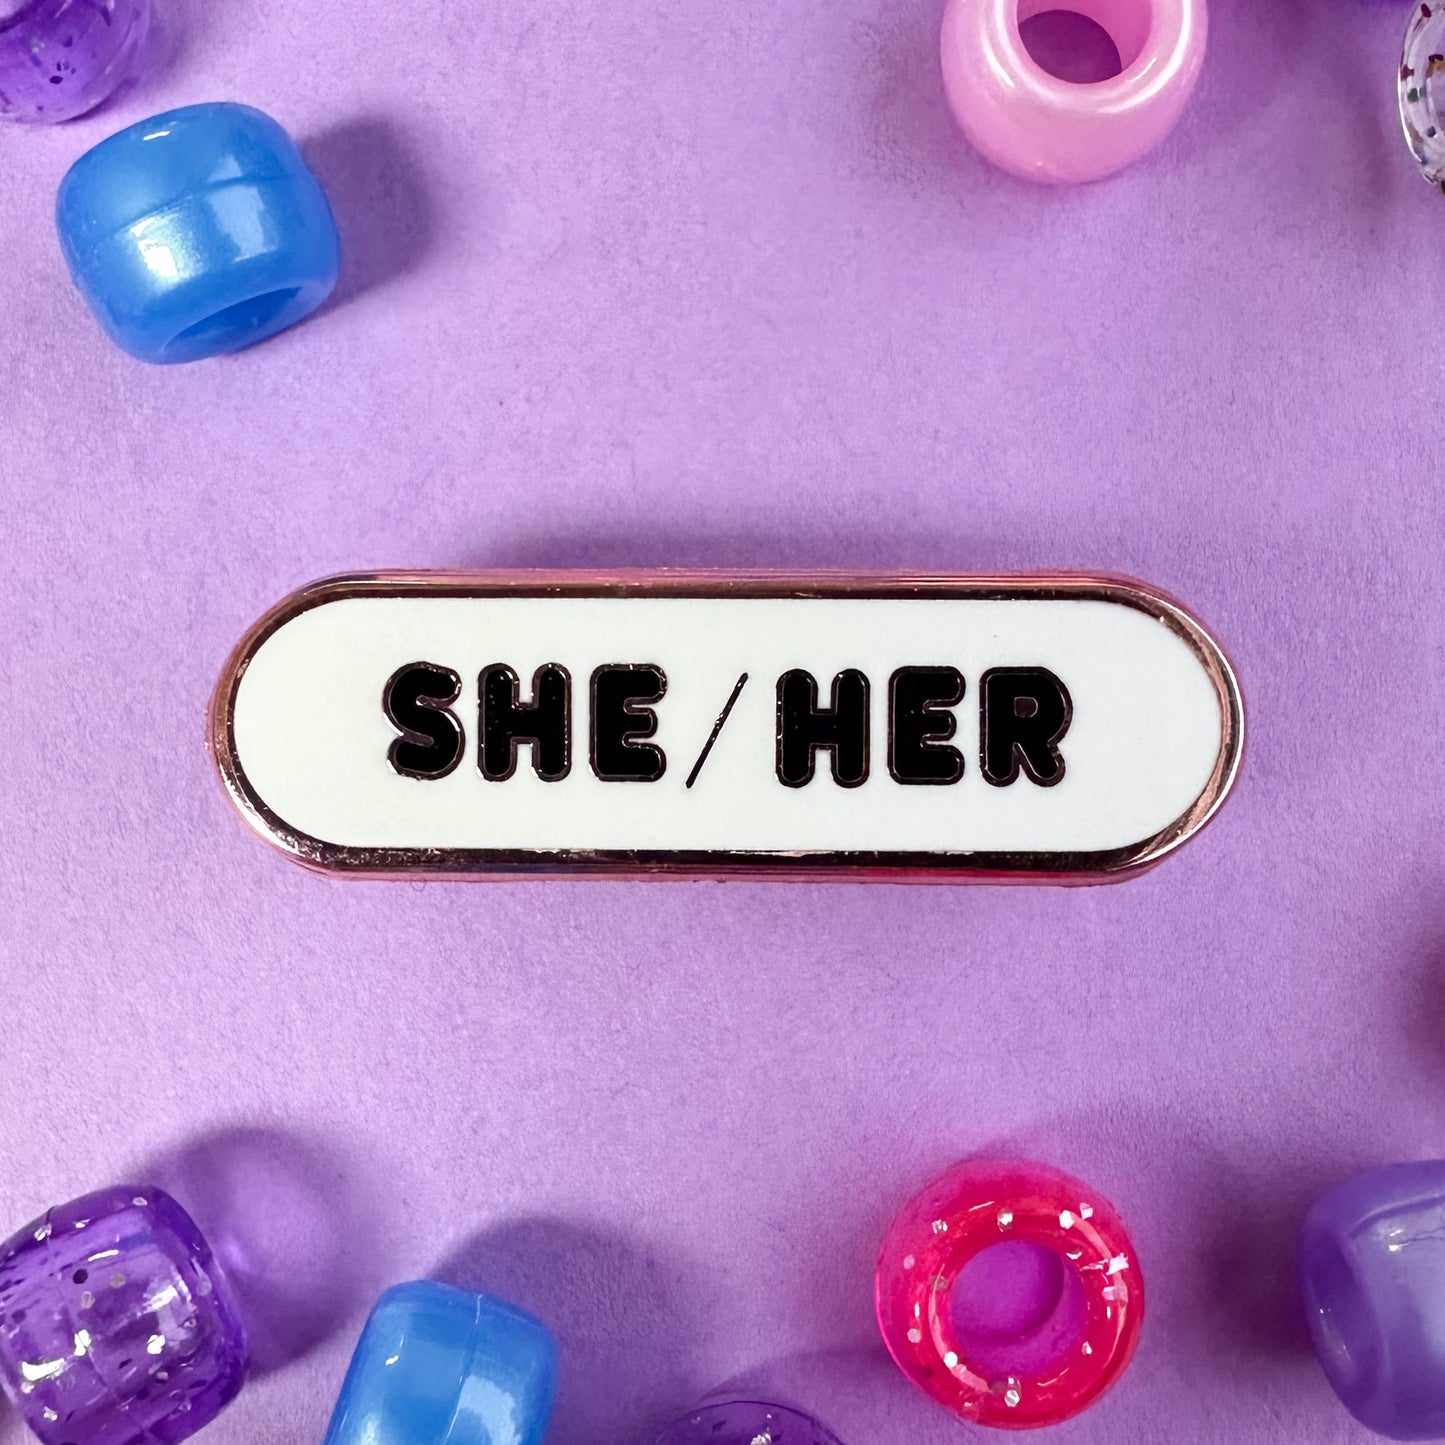 A capsule shaped pin with the pronouns "She/Her" on it. The pin is on a lavender background with pink, purple, and blue pony beads scattered around. 